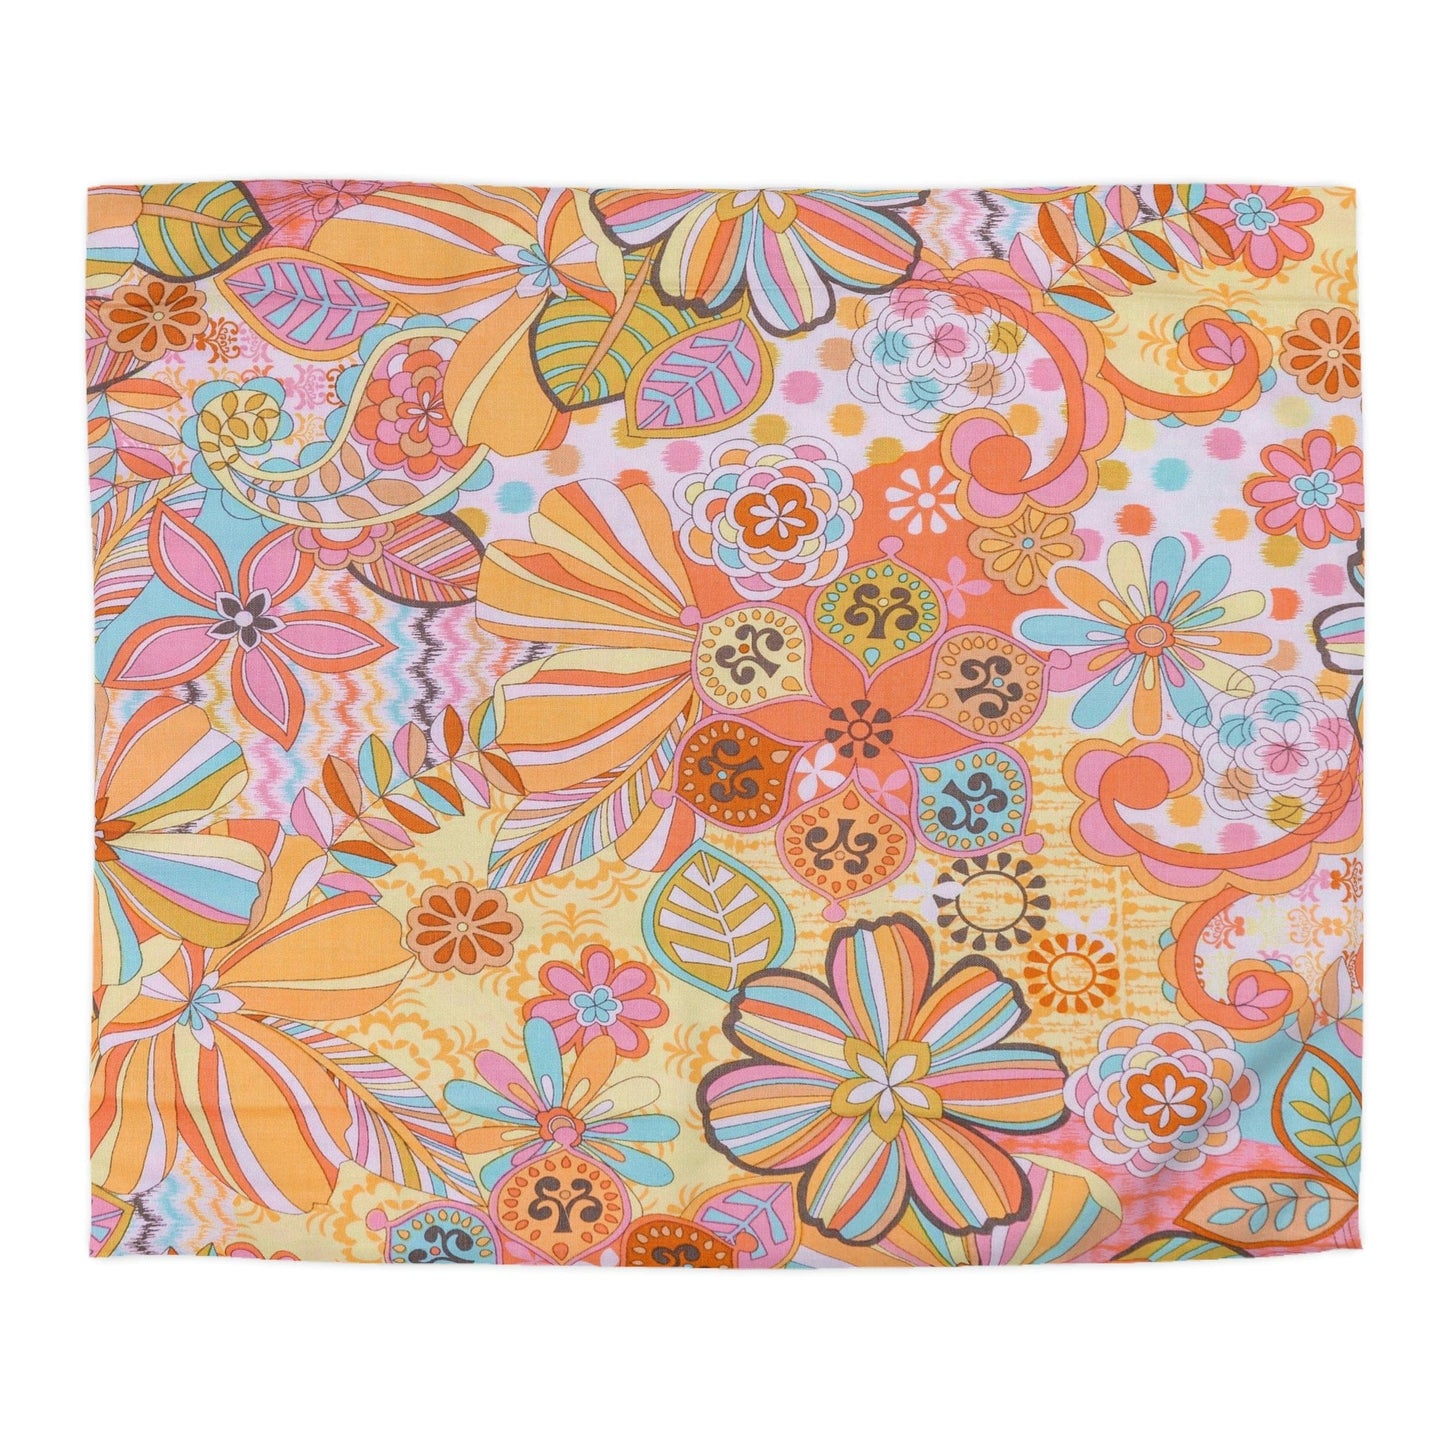 Kate McEnroe New York Retro Trippy Flower Power Duvet Cover, 70s Mid Mod Hippie Chic Floral Bedroom Decor with Groovy Orange, Yellow, and Blue Palette Duvet Covers